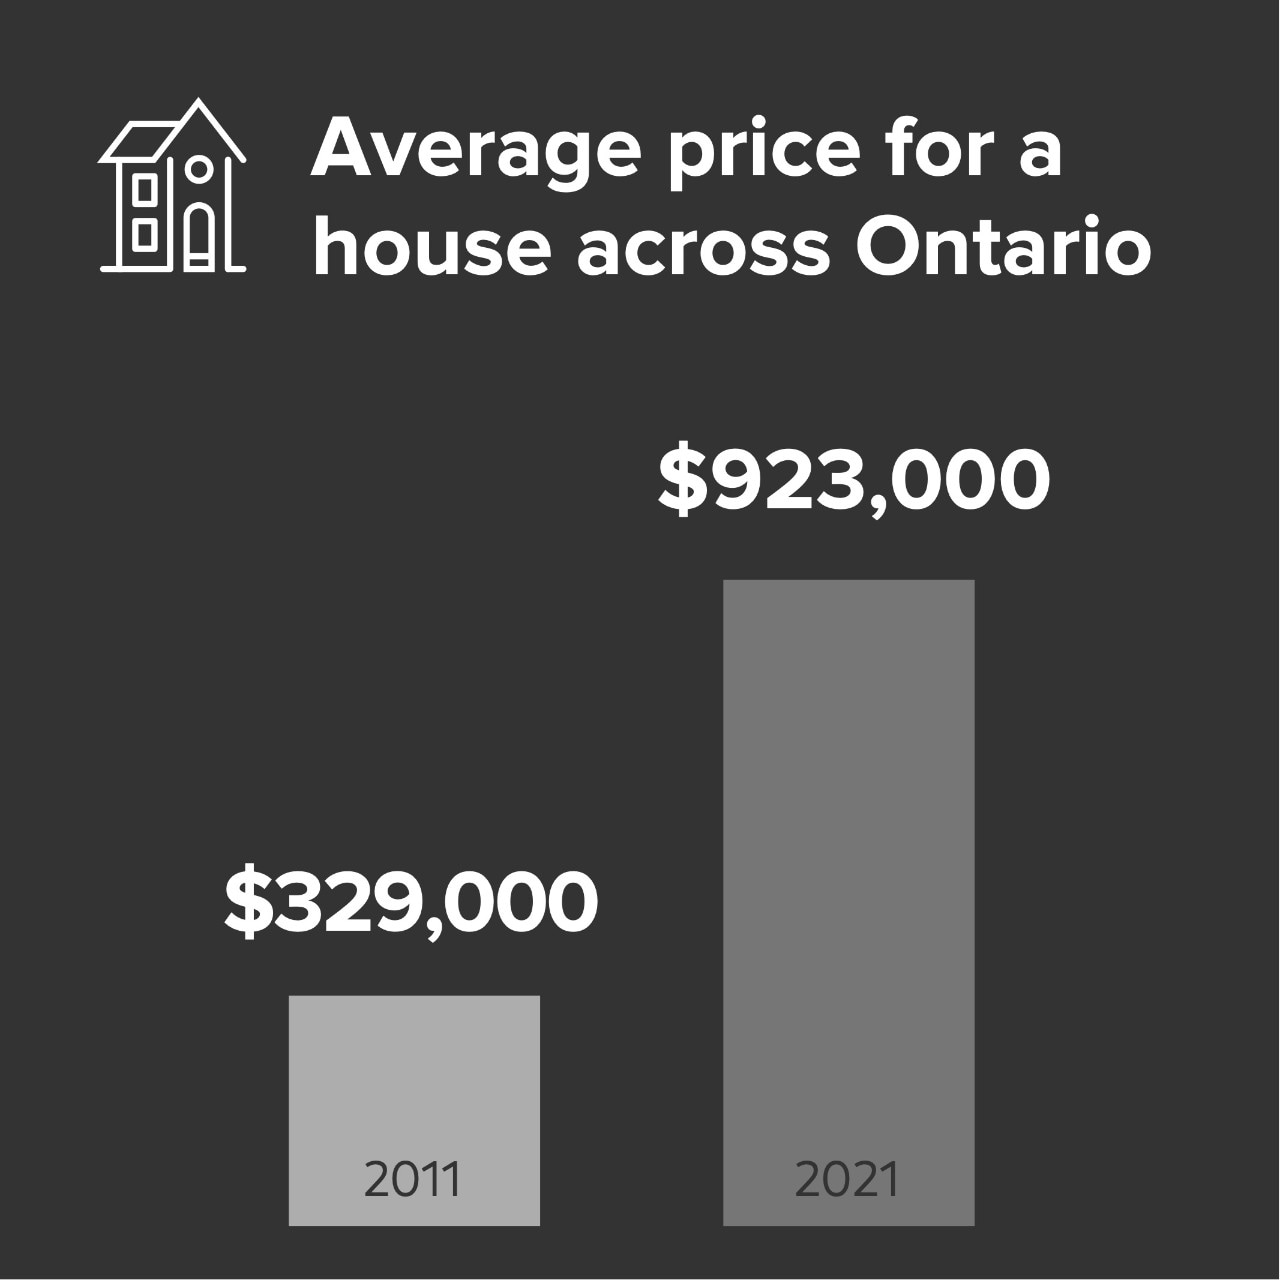 Average price for a house across Ontario. 2011 - $329,000. 2021 - $923,000